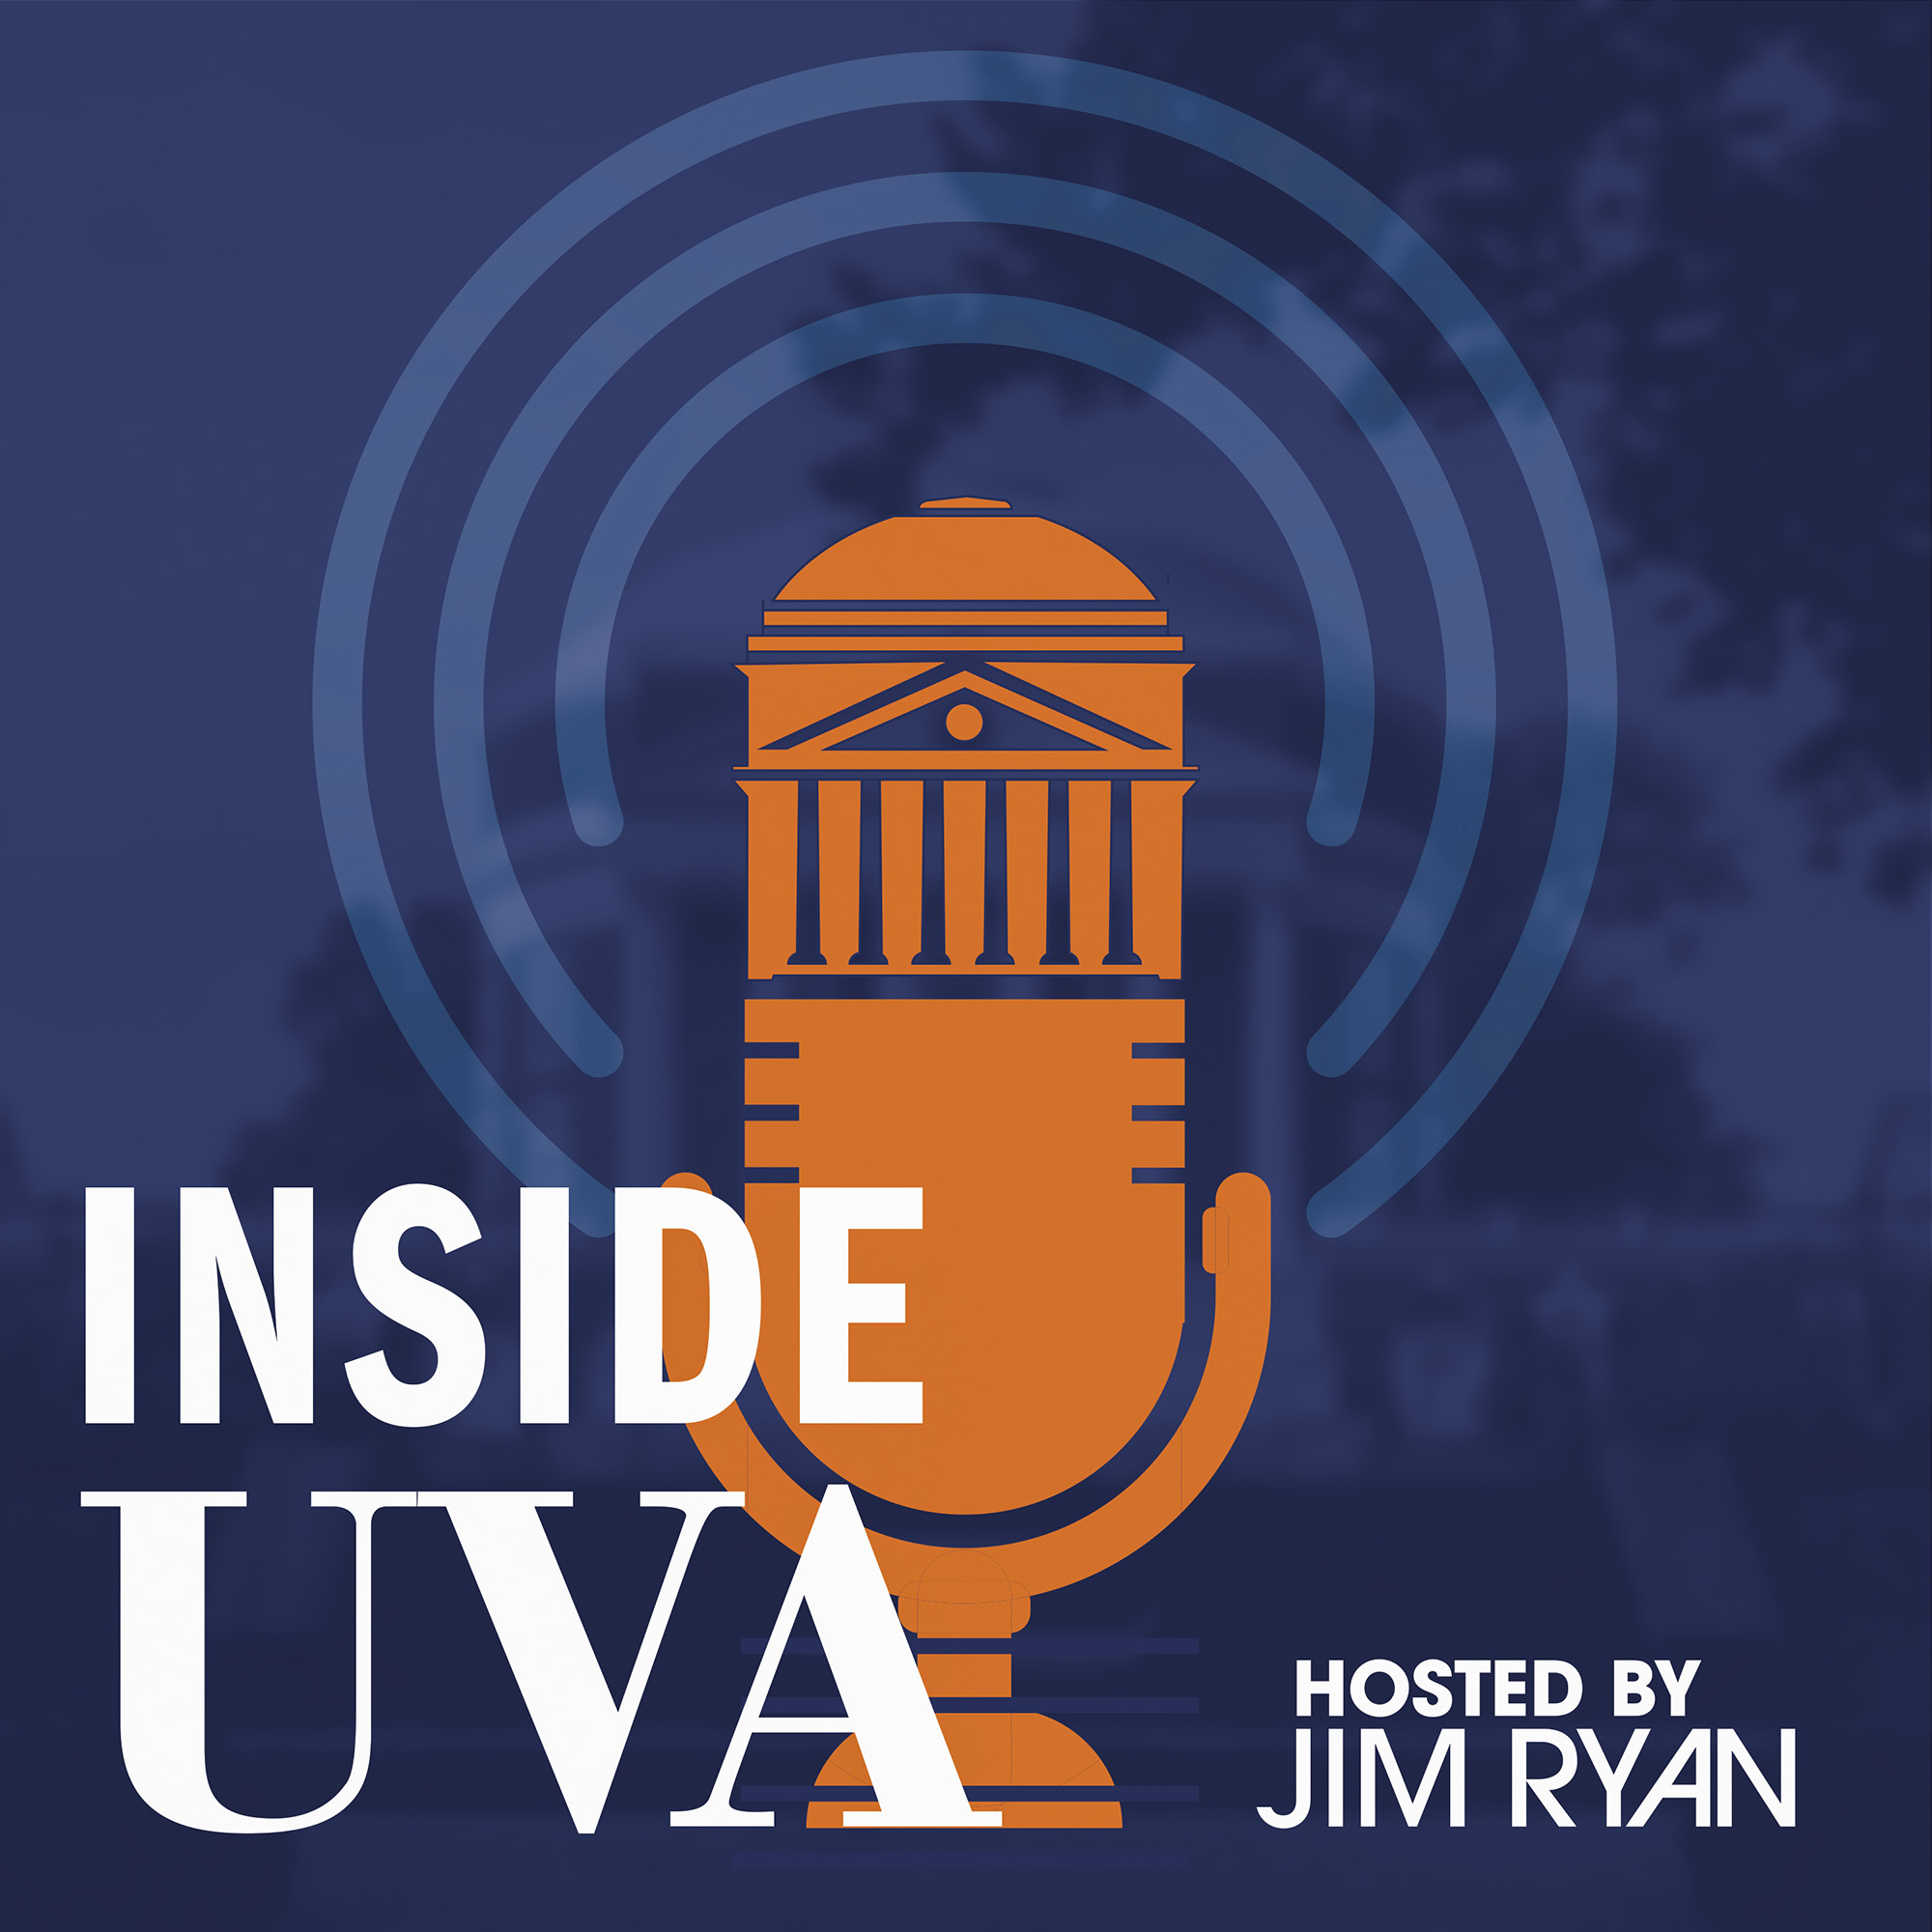 Text: Inside UVA hosted by Jim Ryan